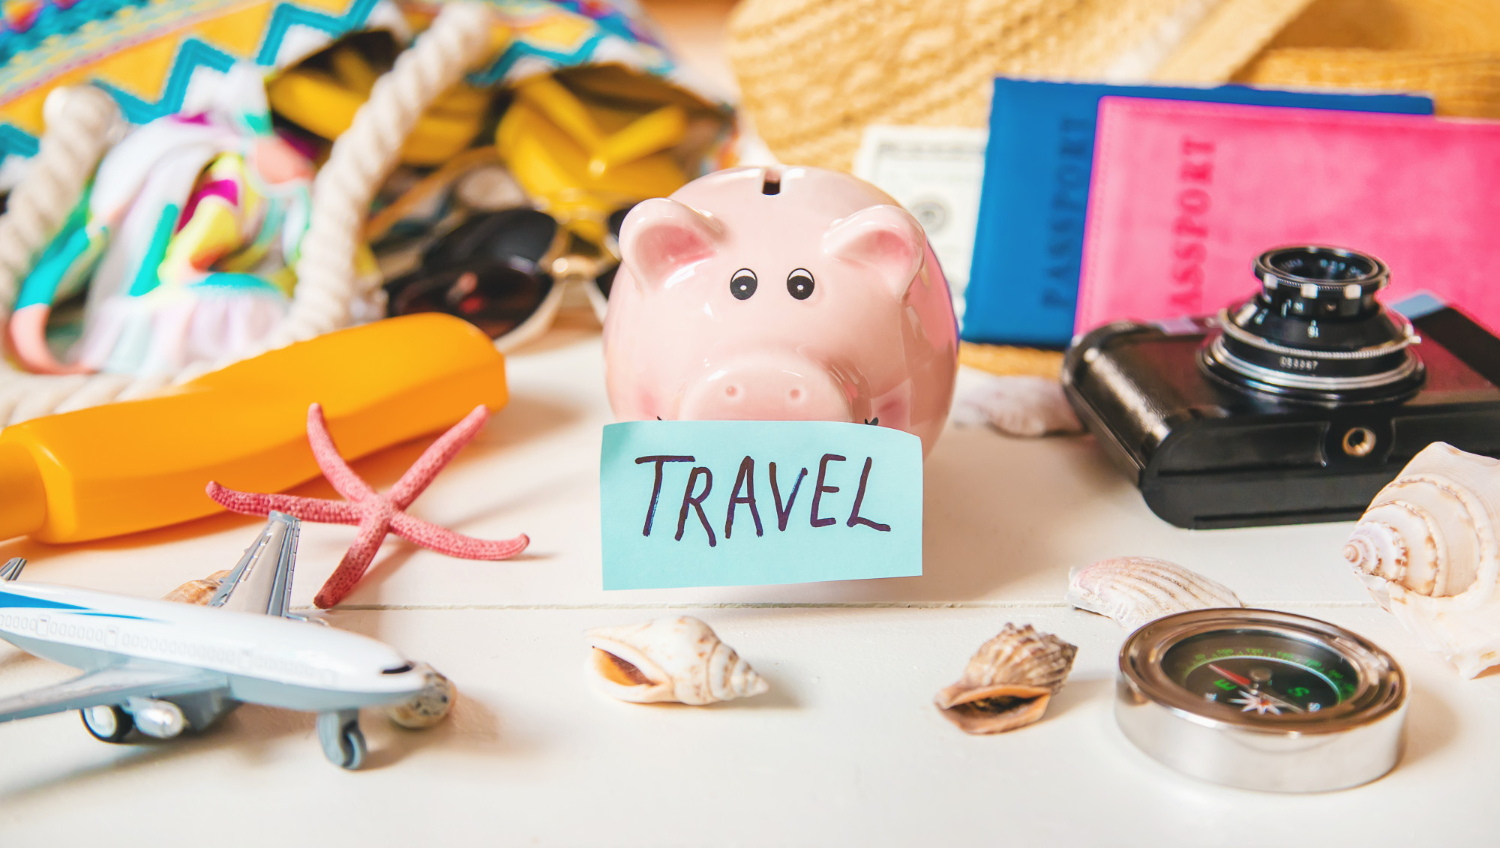 3 Essential Tips to Save Money While Traveling